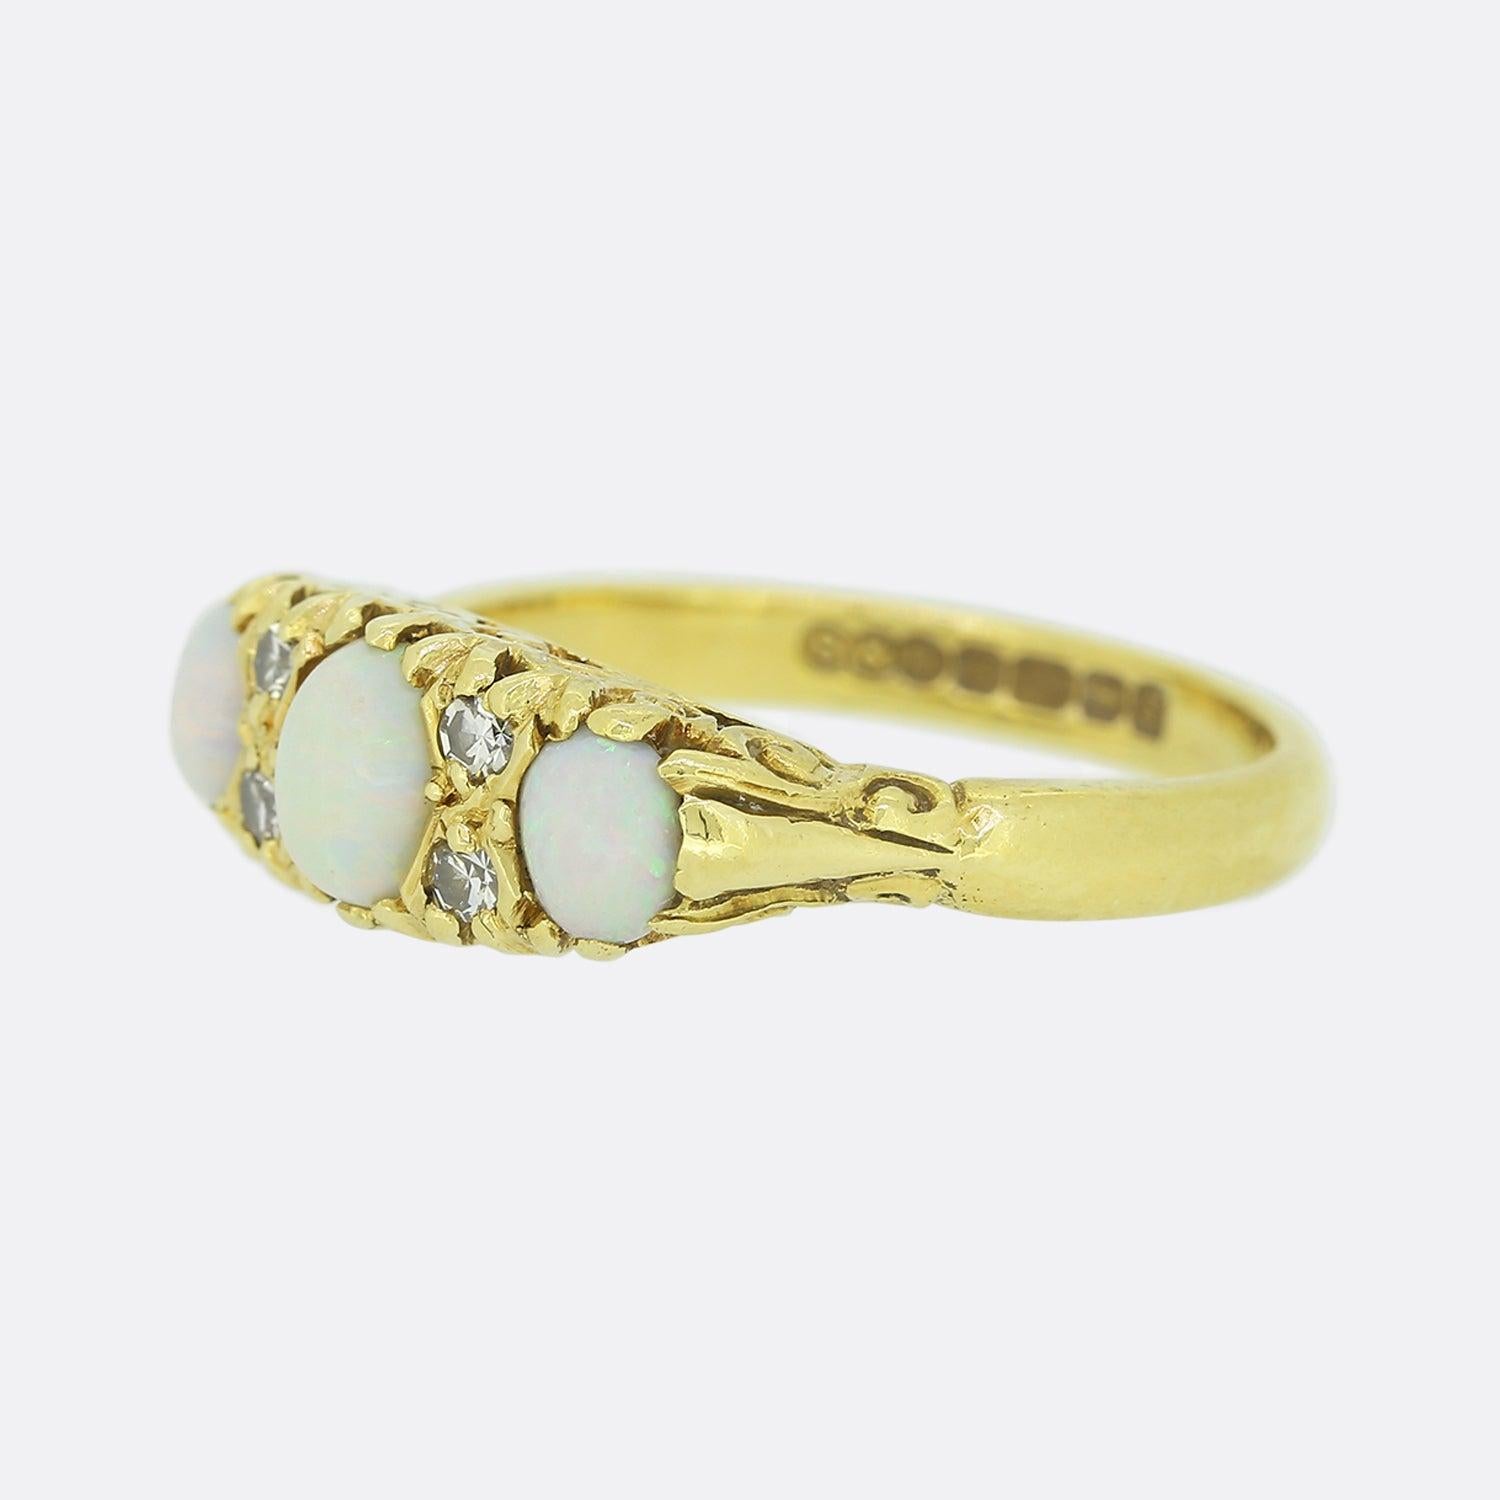 This is an 18ct yellow gold opal and diamond ring. The ring is set with three graduated oval cut cabochon opals that each have a vibrant and wonderful play of colour. There is also four small single cut diamonds set in between the opals.

Condition: